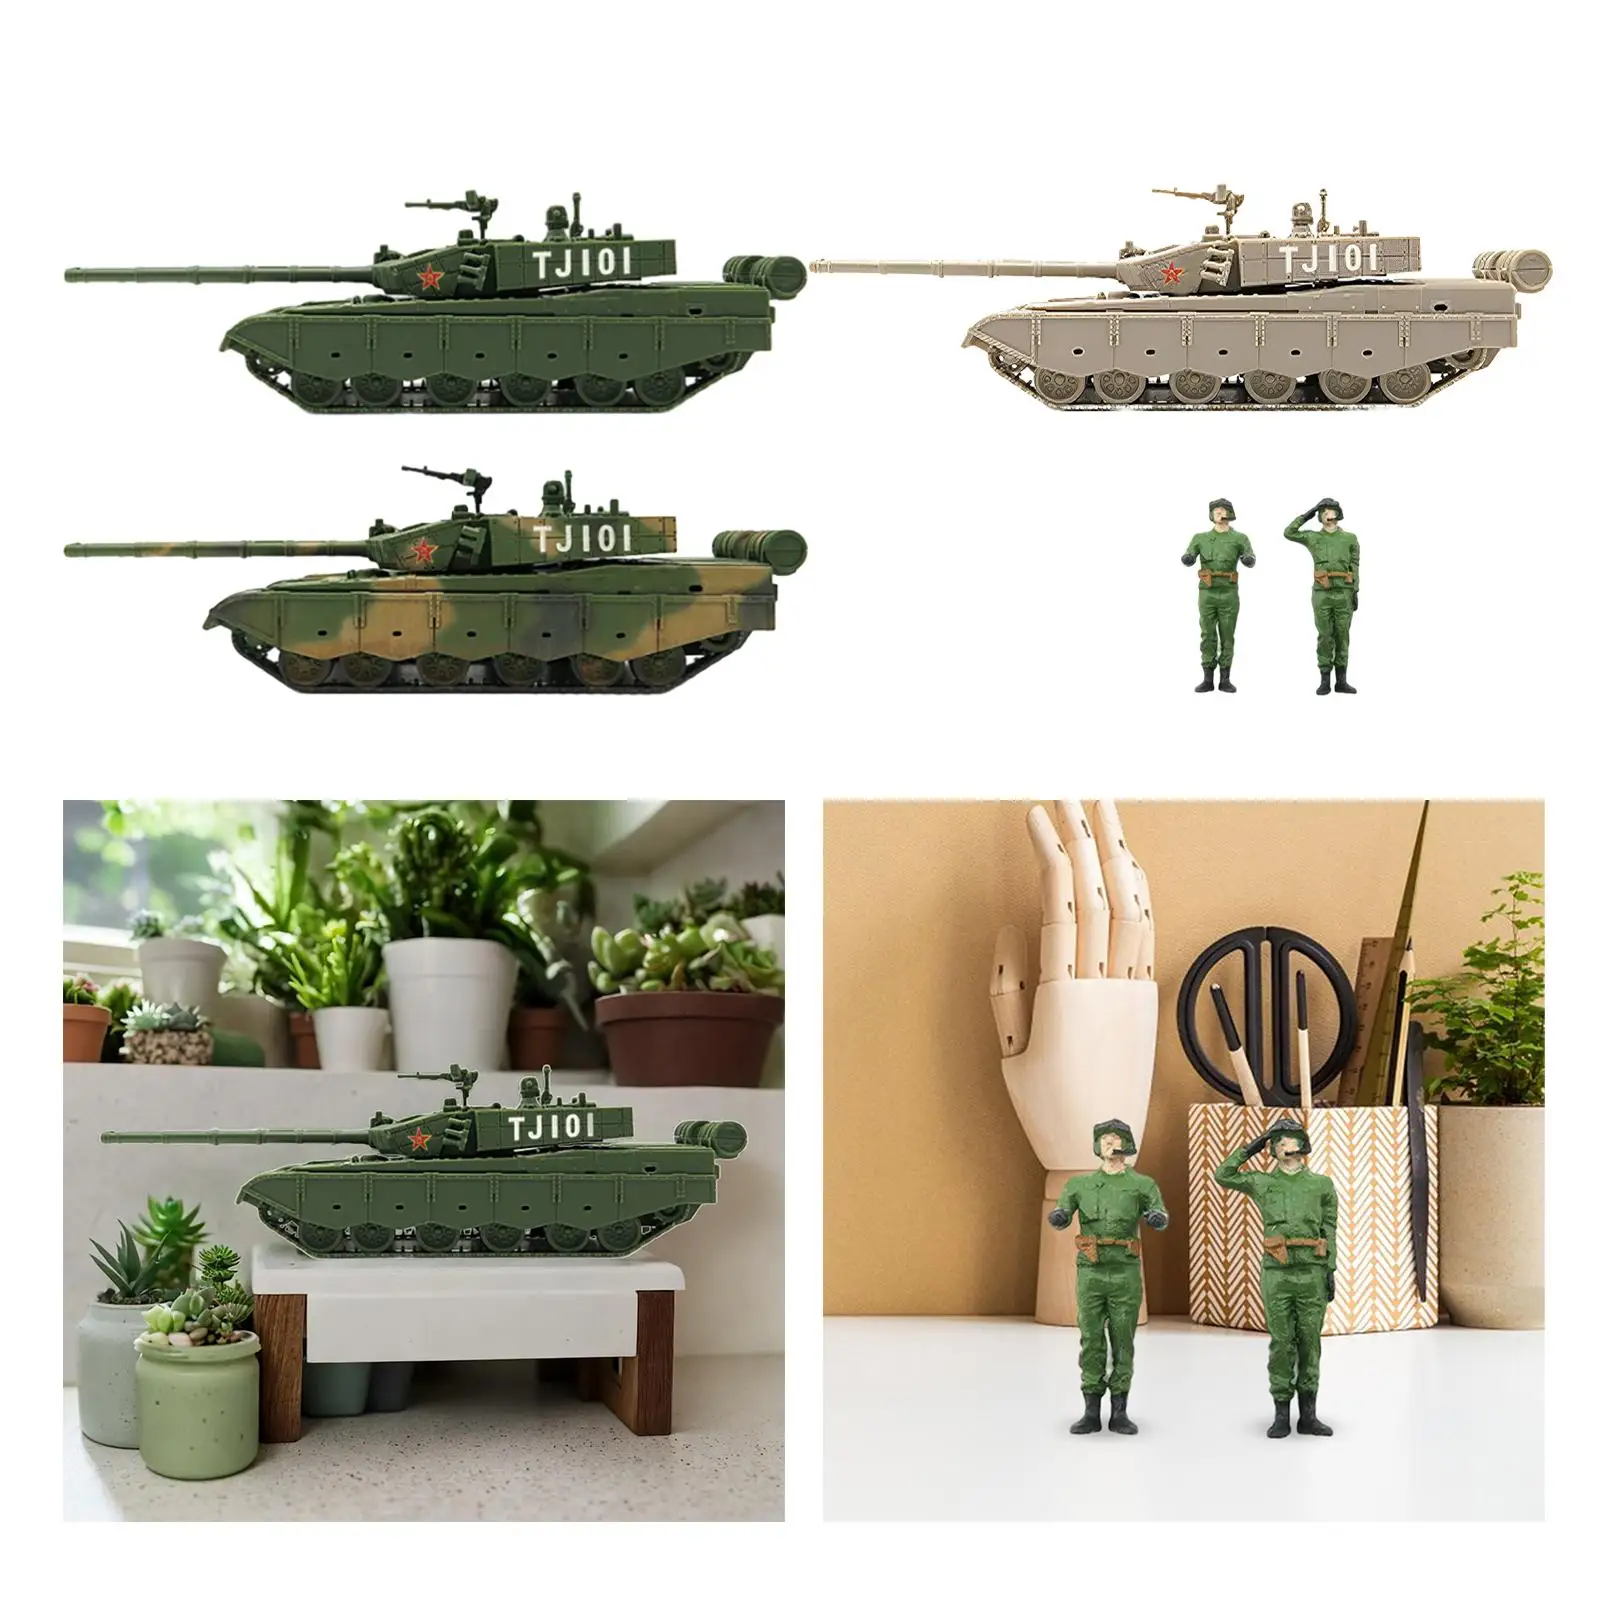 1/72 Scale Tank Model Desk Decoration Assembled Tank Model Tracked Crawler Chariot for Display Children Collection Gift